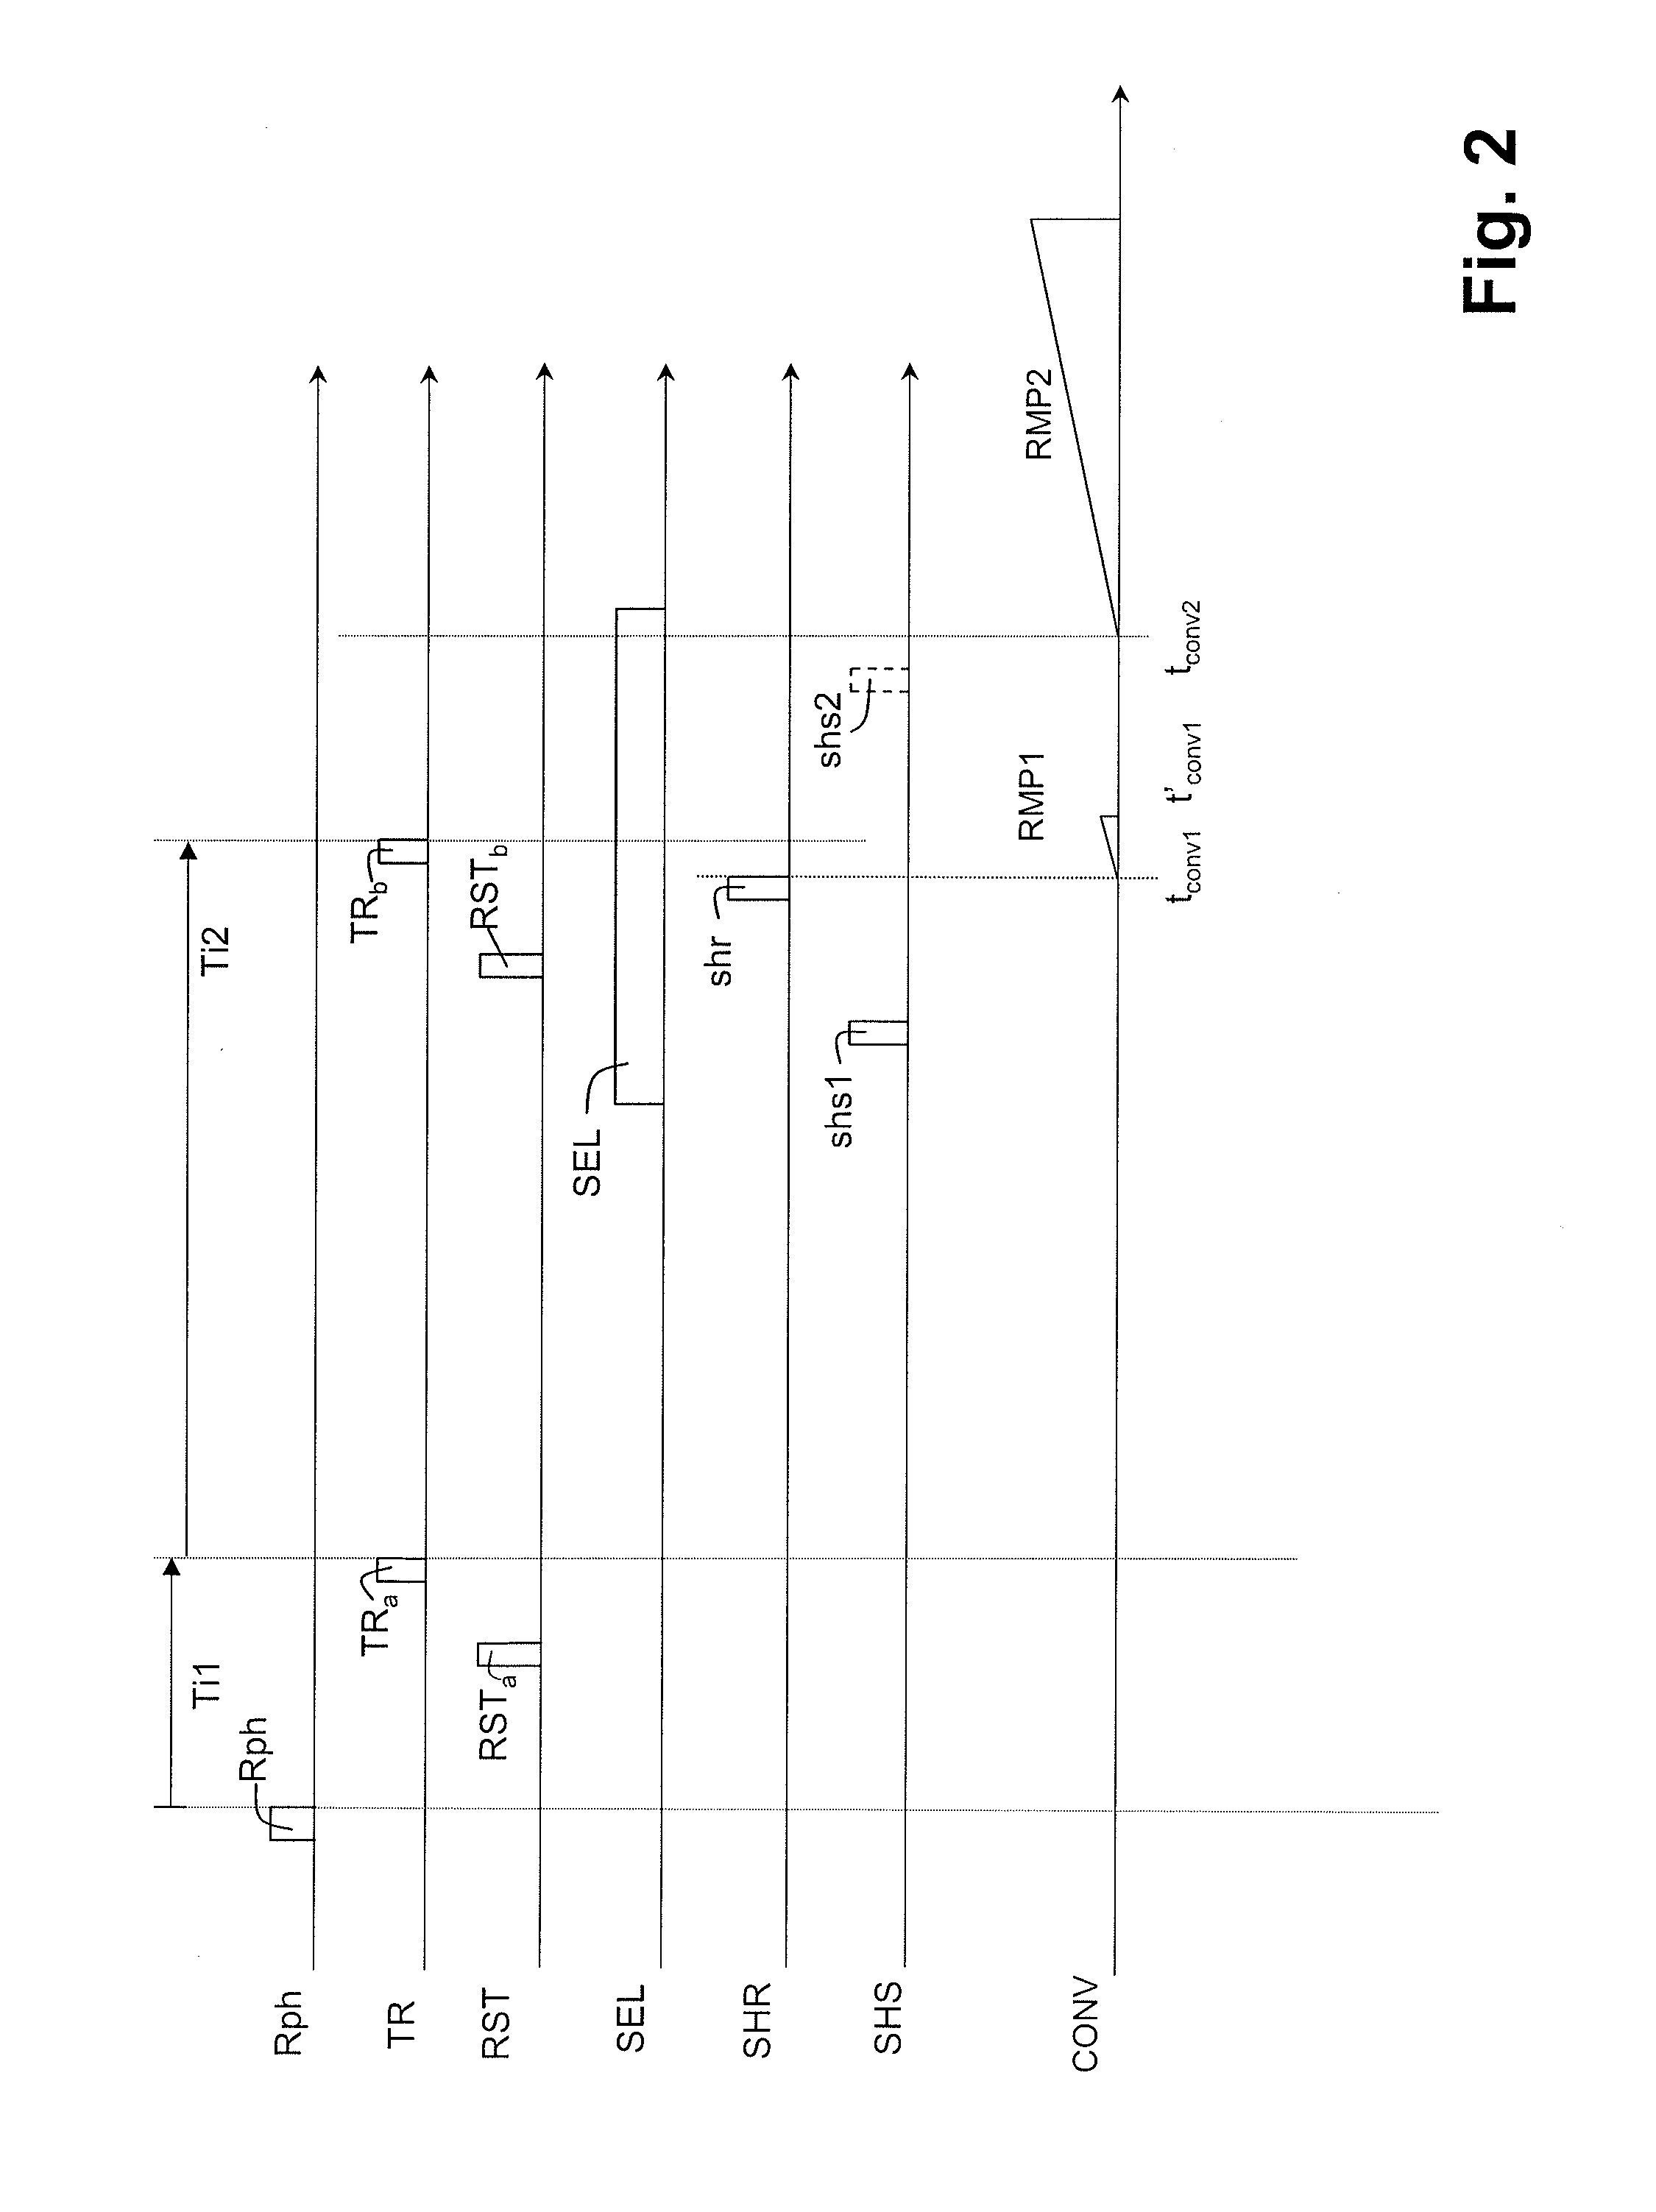 Image sensor with double integration time and conditional selection